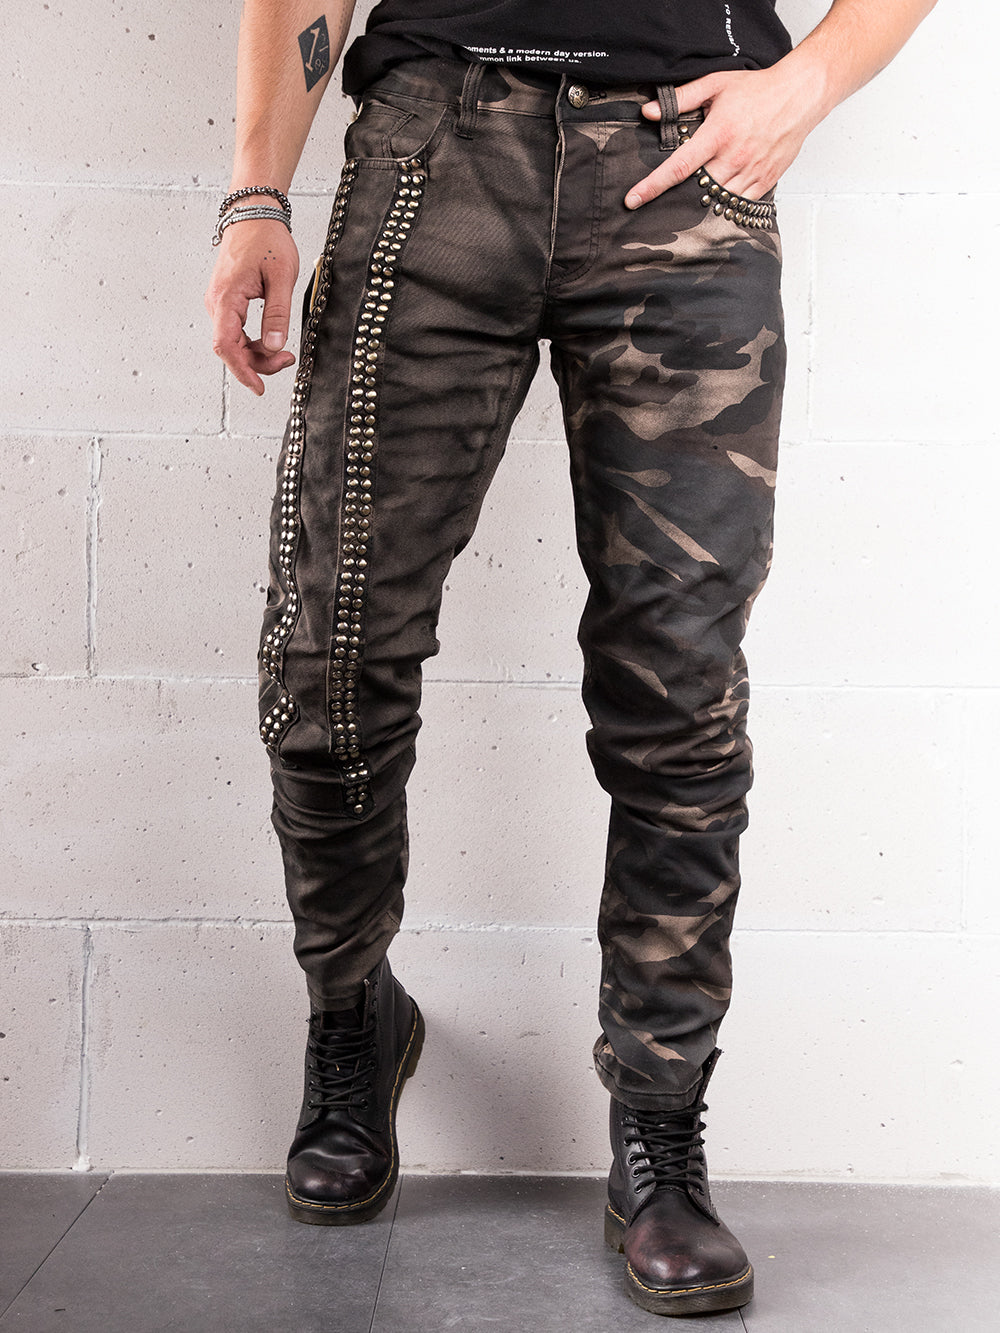 A man wearing SNIPER hand crafted camouflage jeans and a black t-shirt with skinny fit.